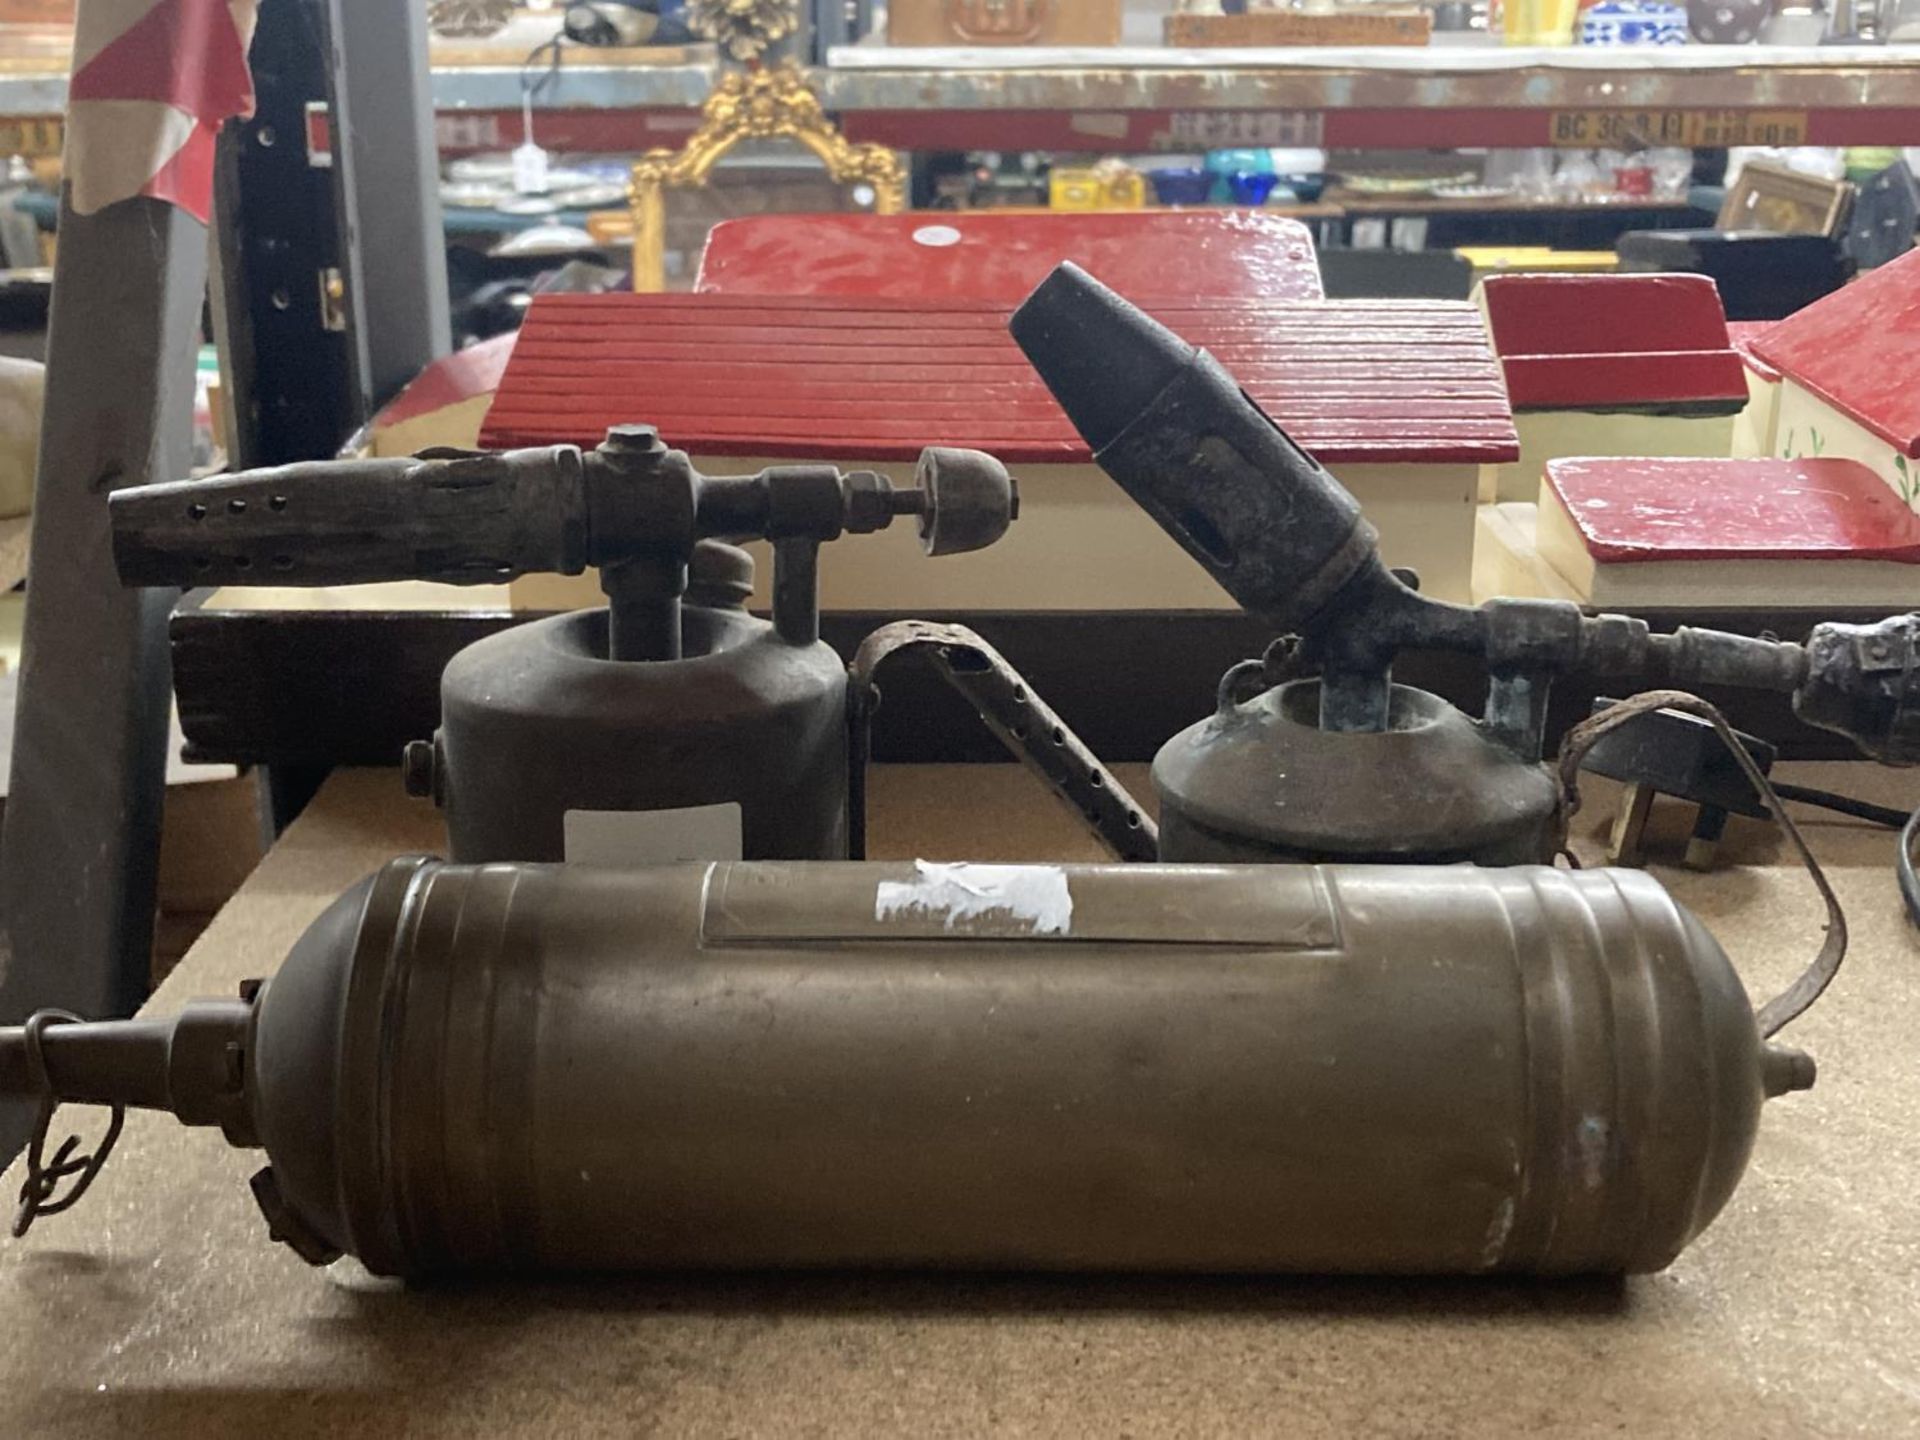 THREE ITEMS TO INCLUDE A VINTAGE FIRE EXTINGUISHER AND TWO BLOW TORCHES